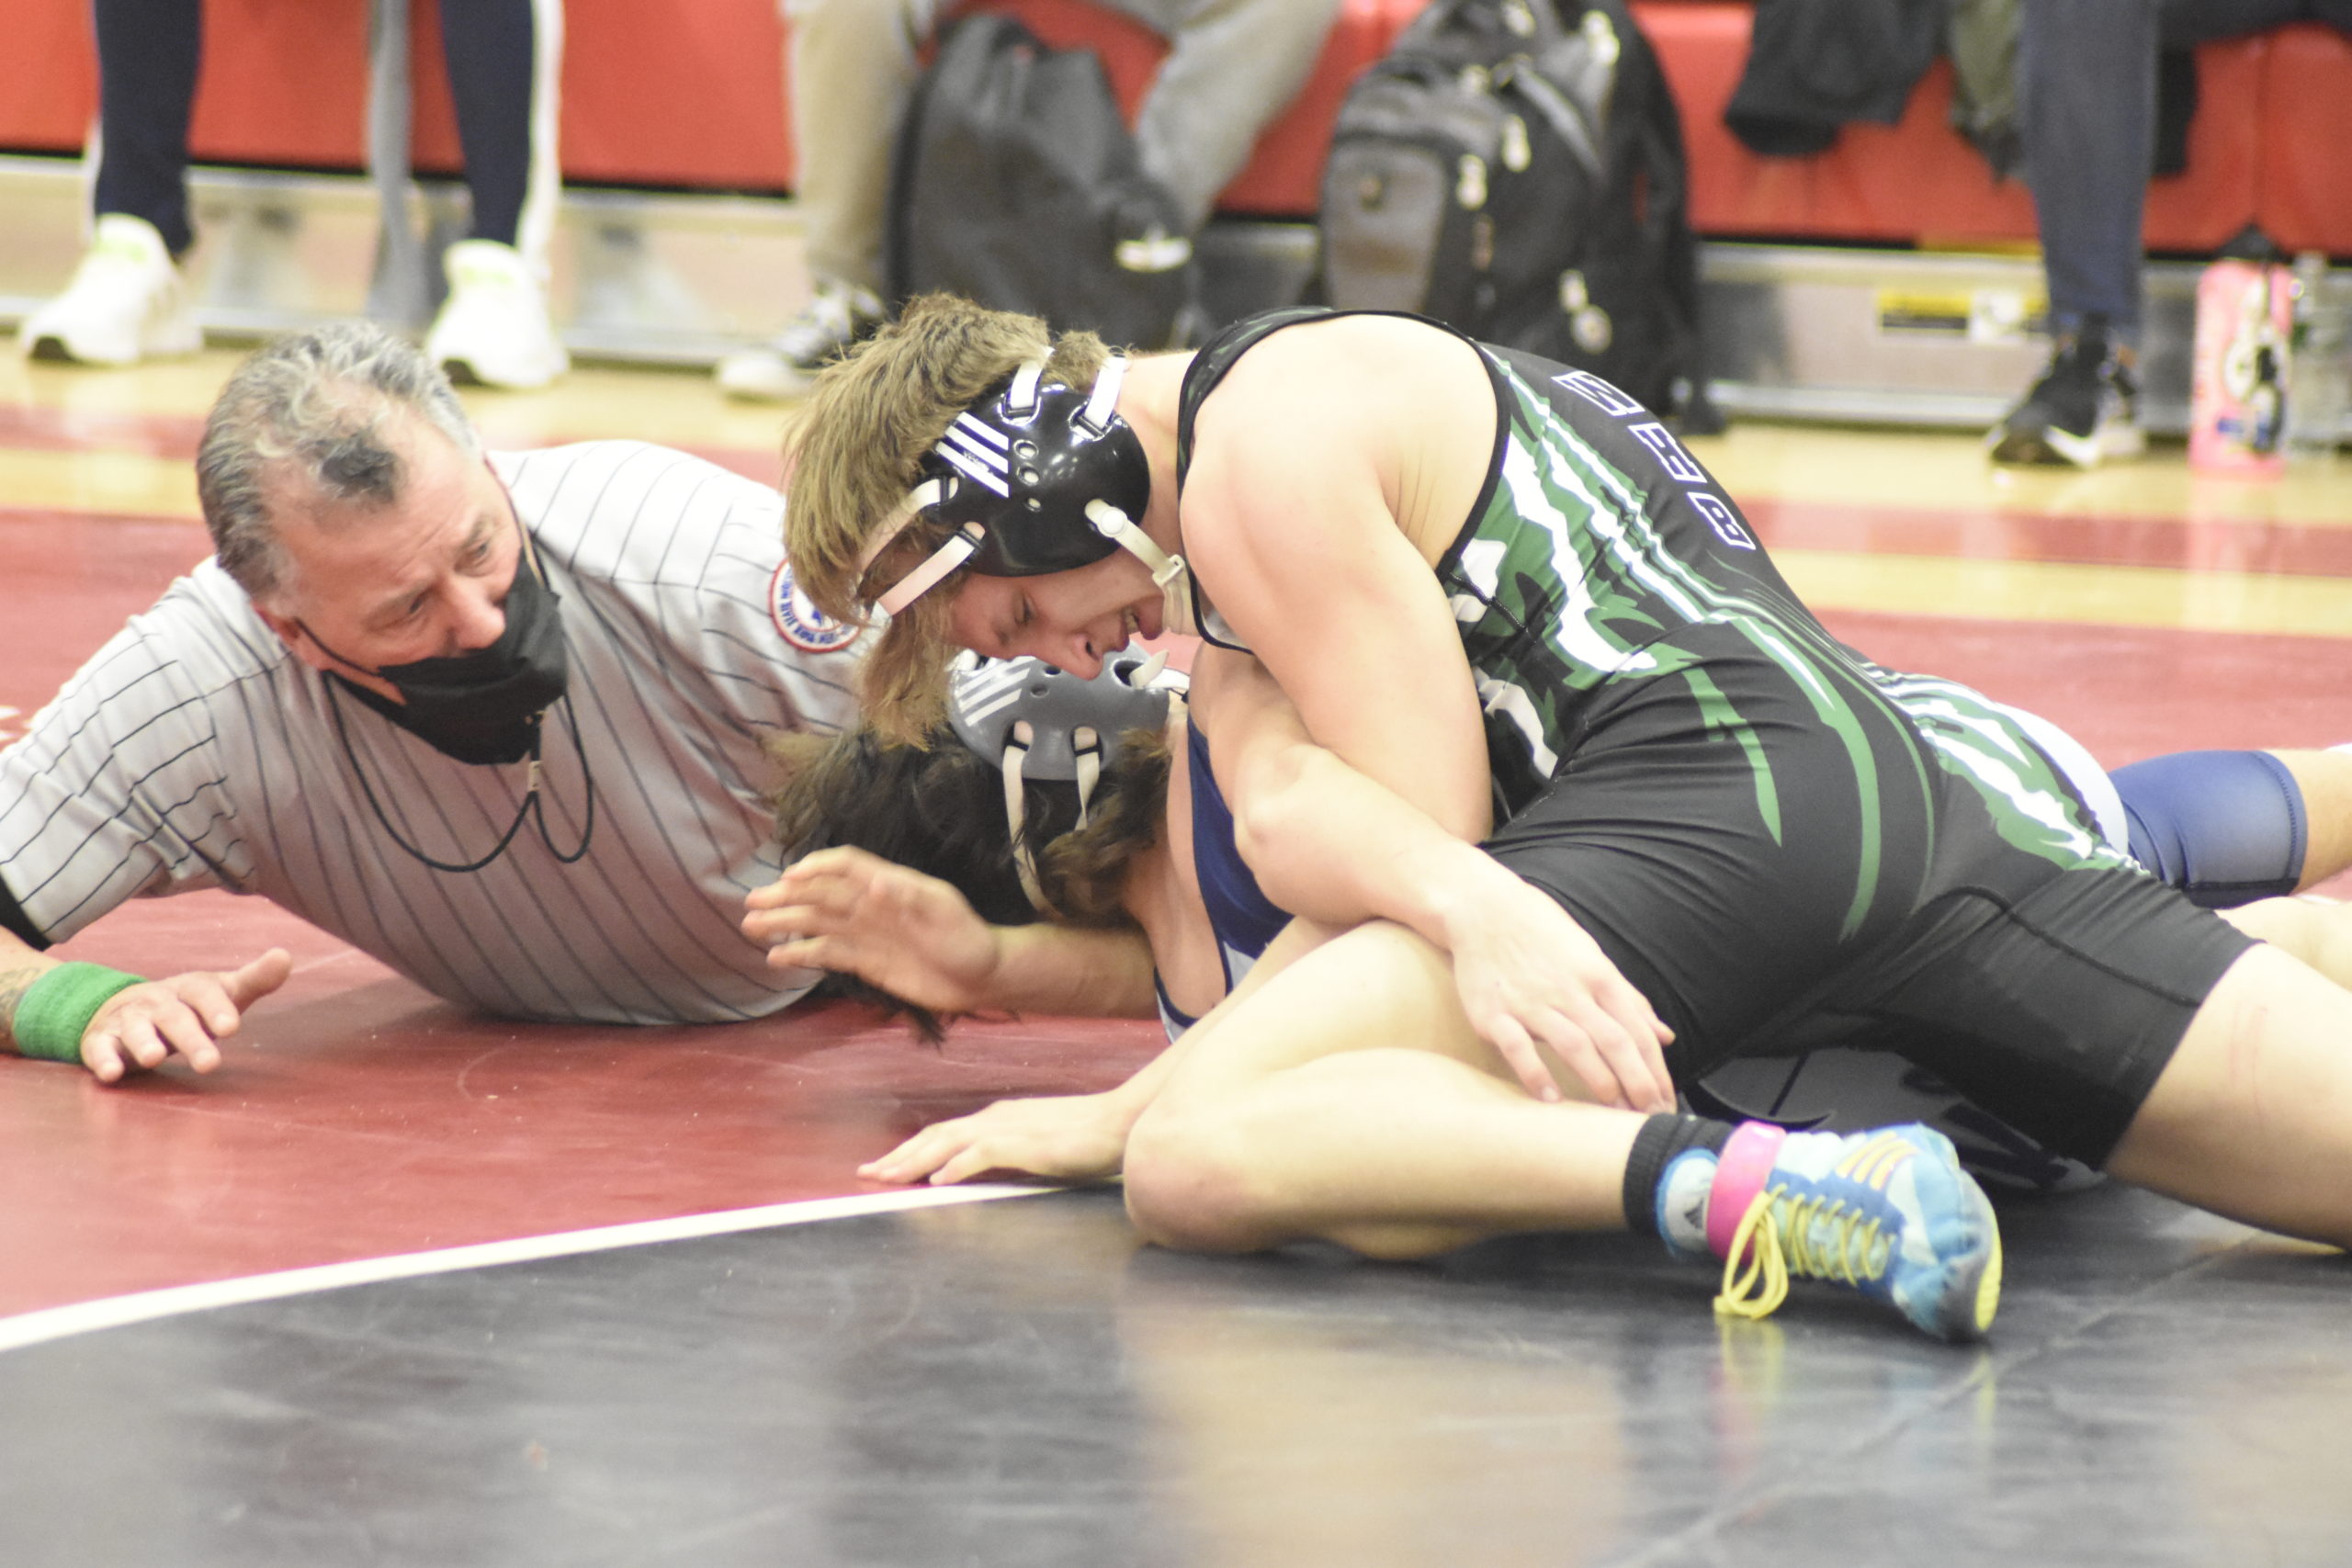 Dom Jurgel takes down ESM's Paul Drummond and nearly pins him, taking the lead with almost a minute remaining in the match.